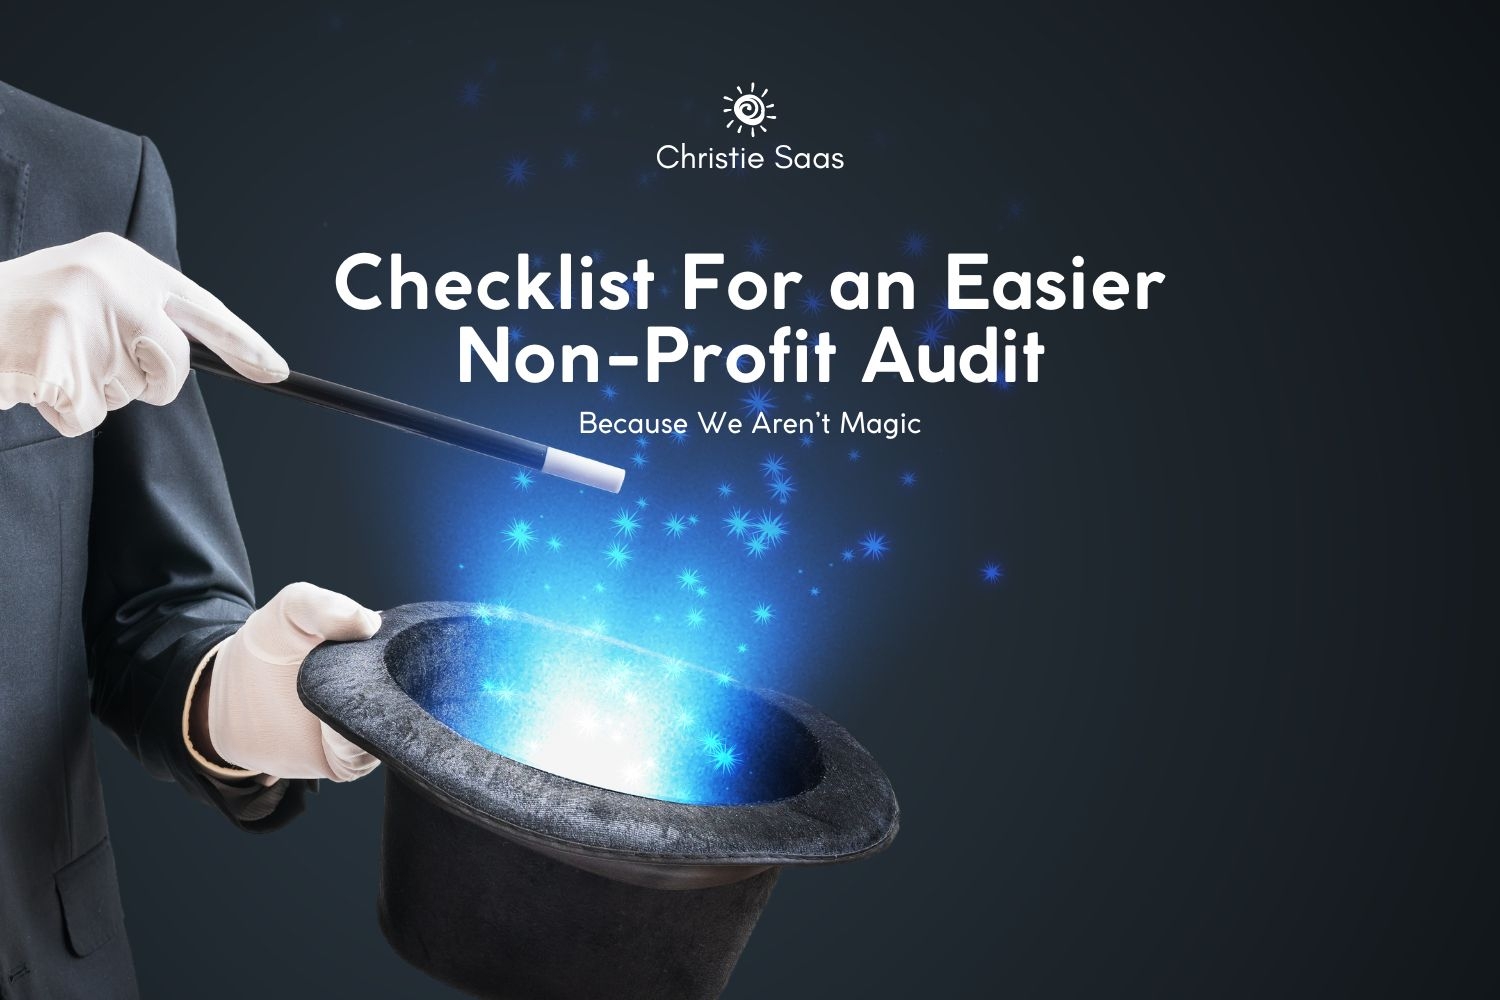 Checklist for an Easier Non-Profit Audit (Because We Aren’t Magic)